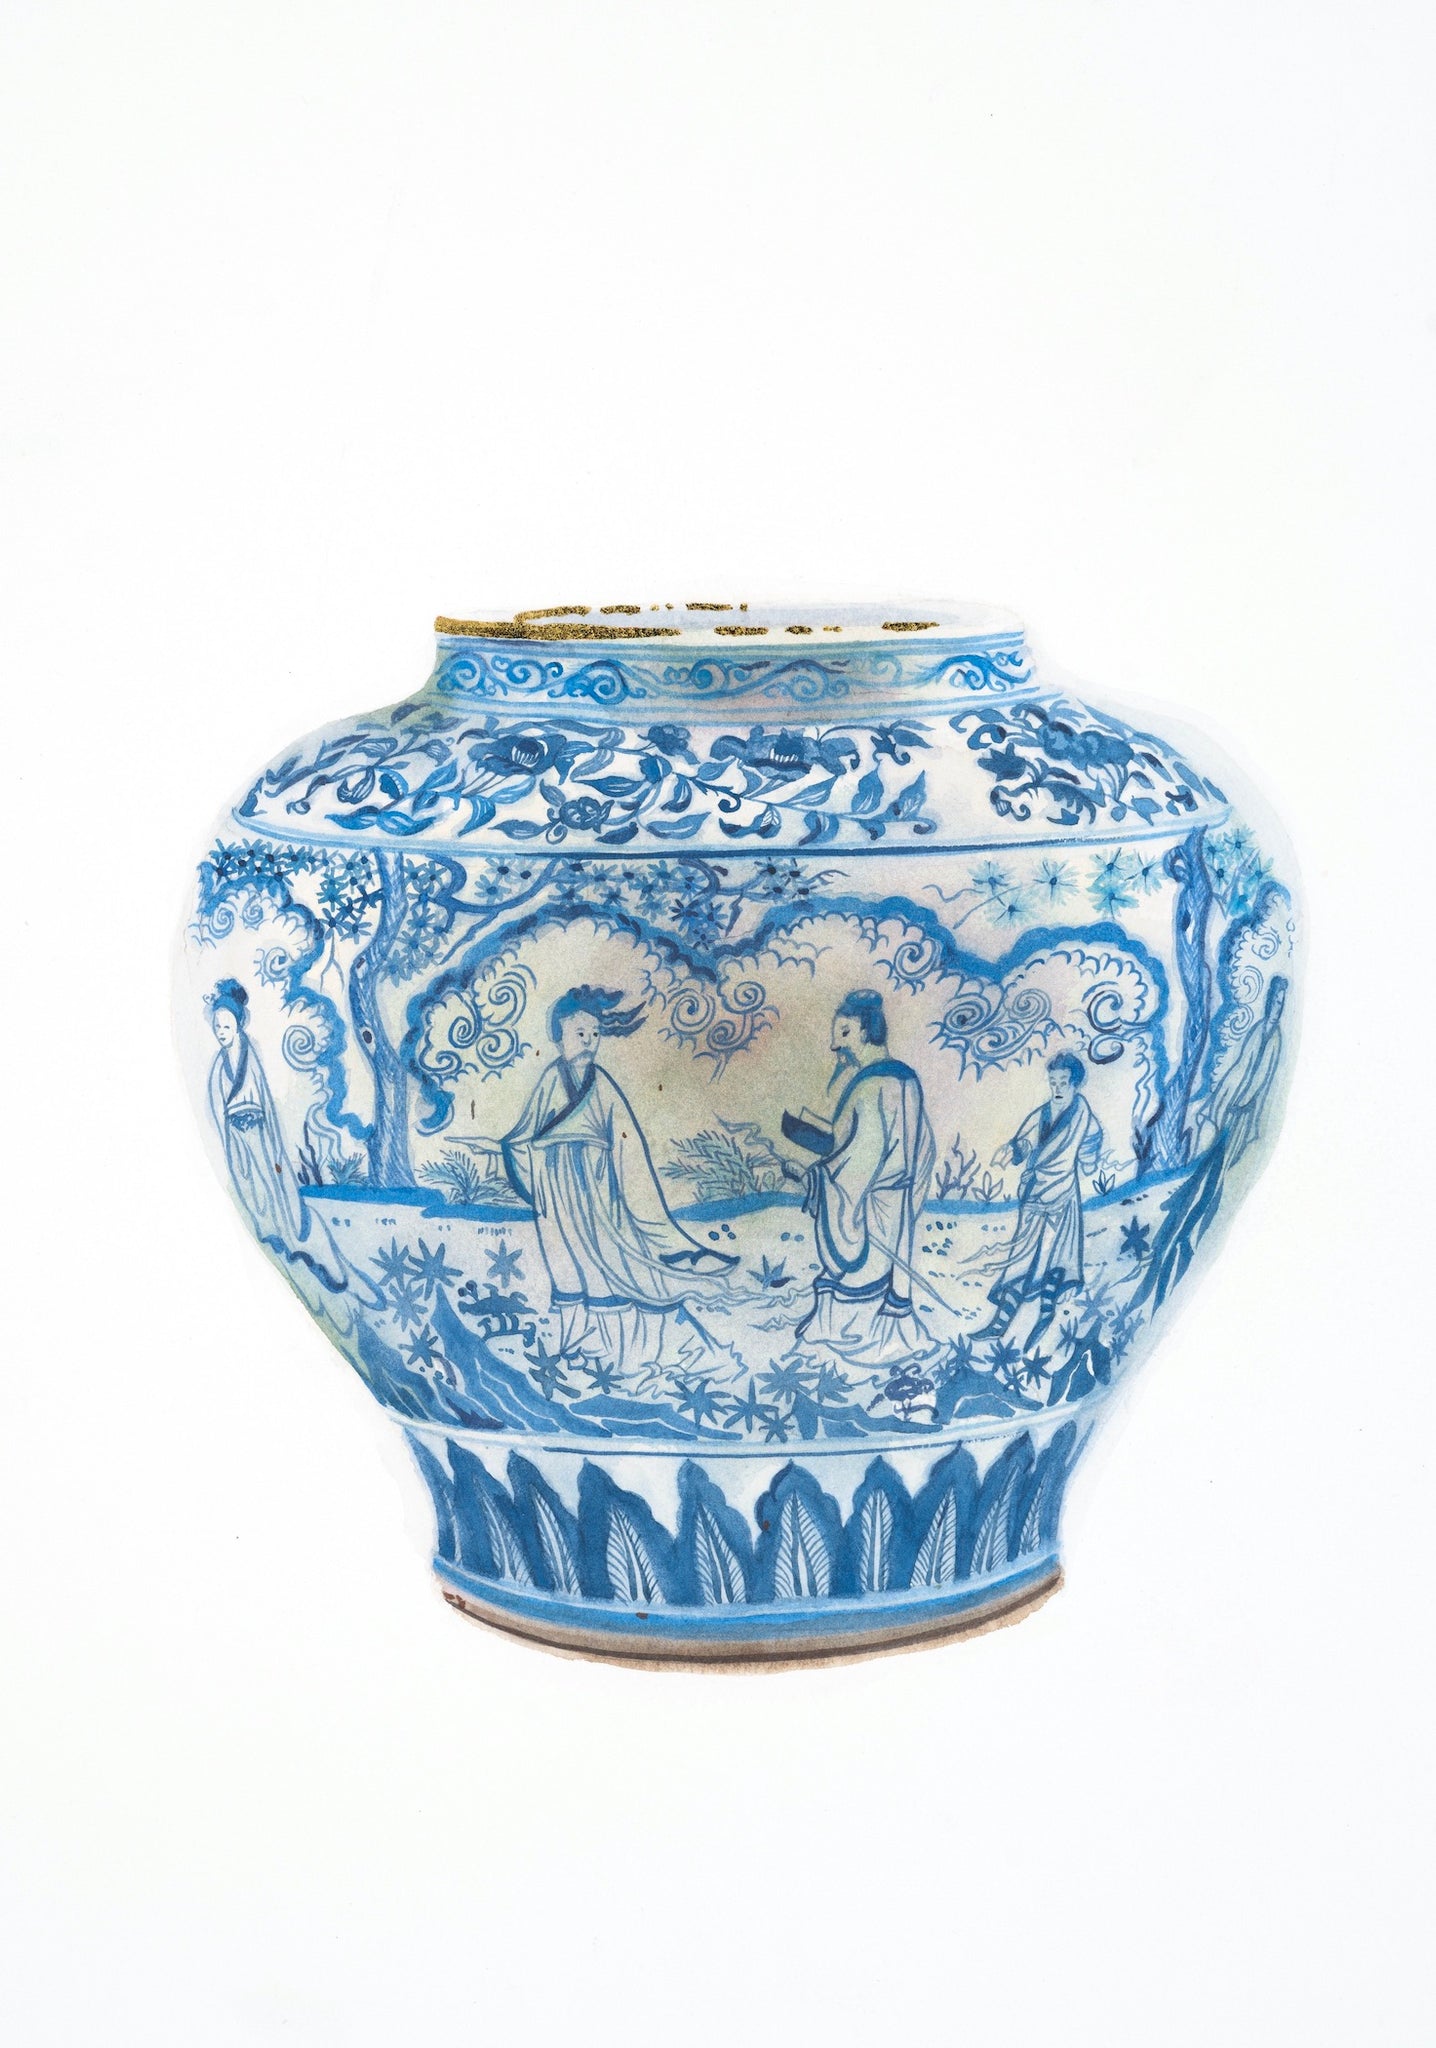 Jingdezhen Wine Jar from the Collection of the Victoria and Albert Museum